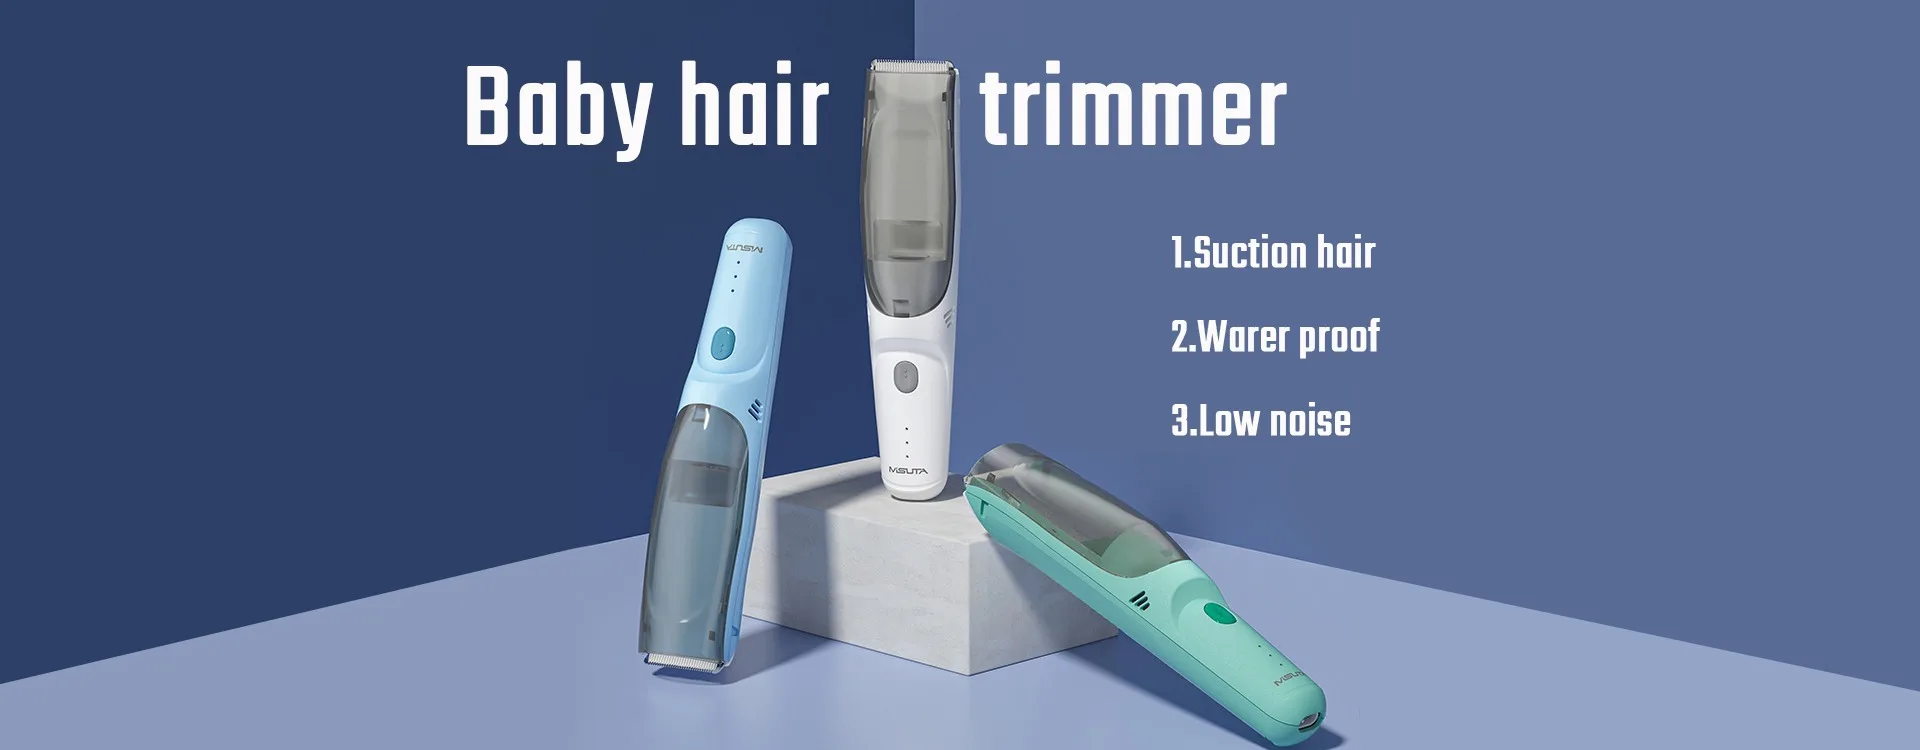 Baby hair trimmer